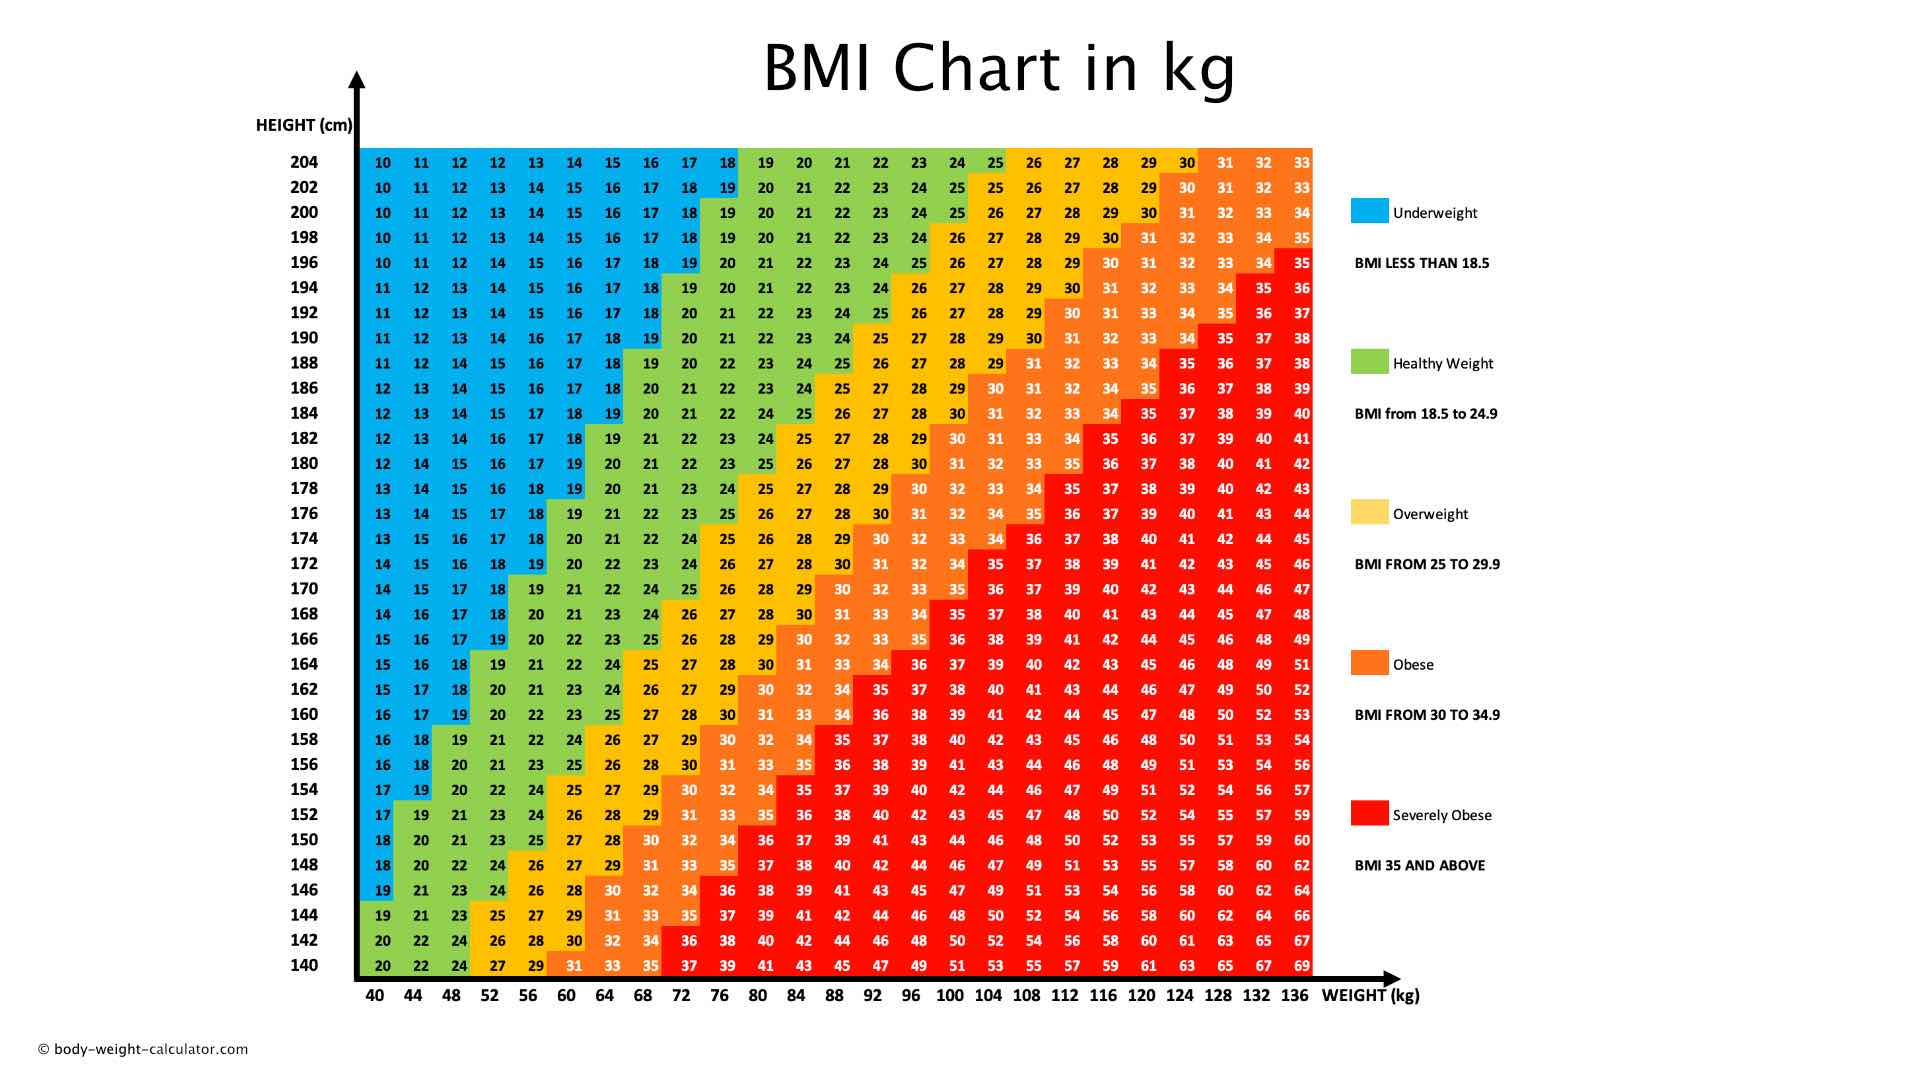 BMI chart by age in India